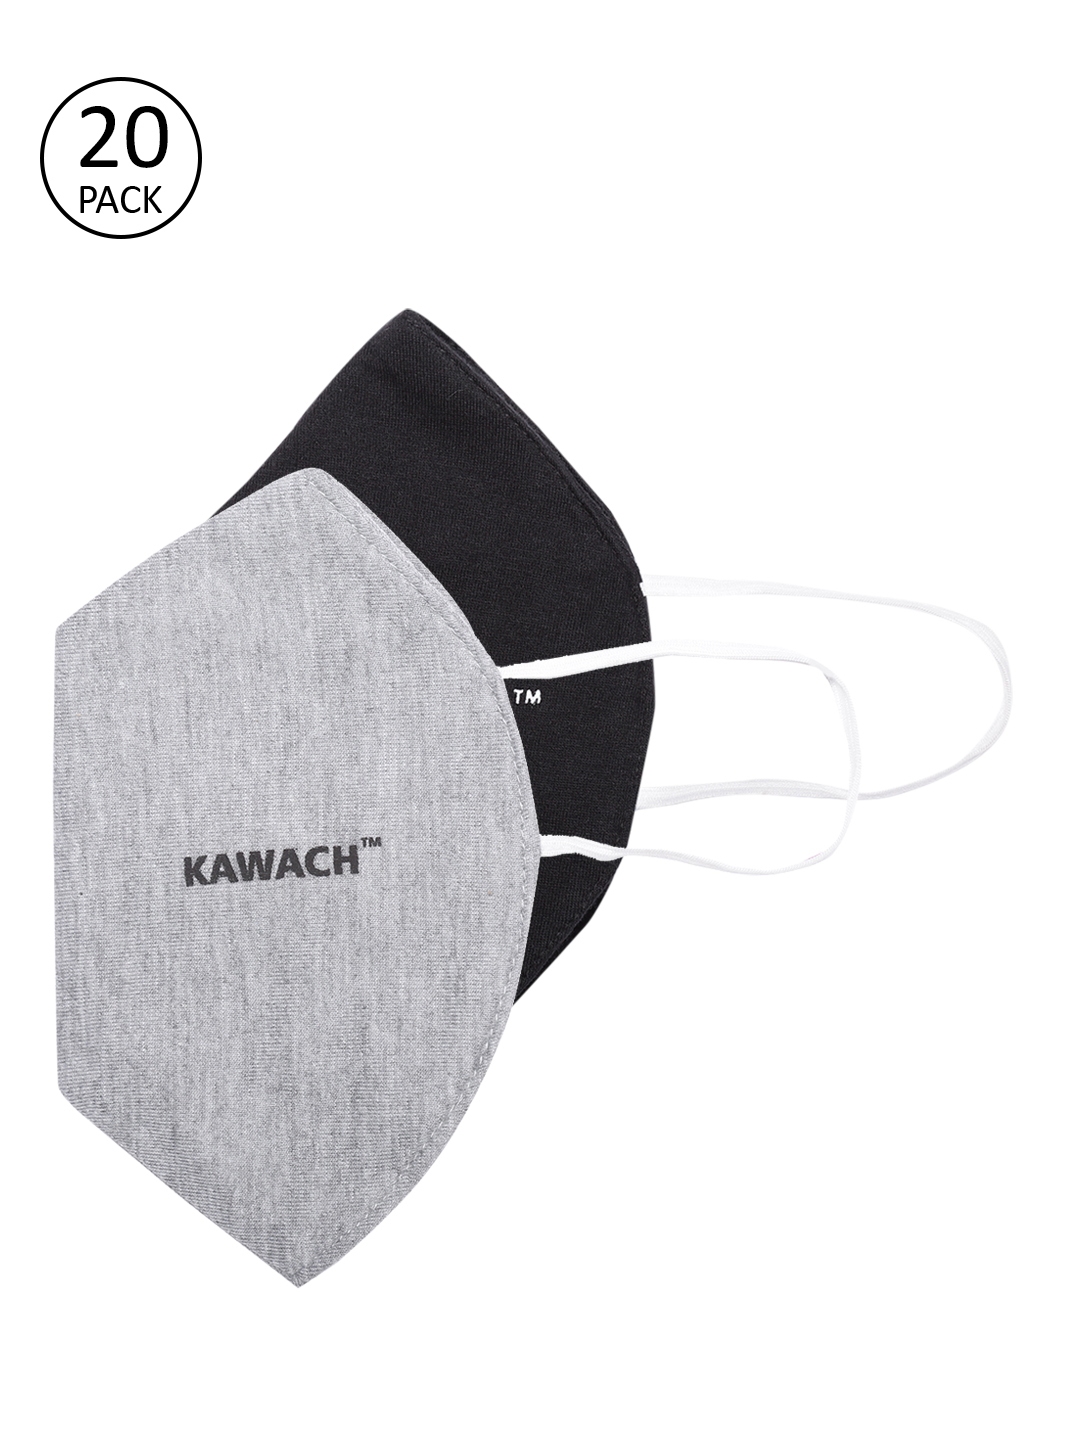 Buy Kawach Unisex Pack Of 20 Reusable 3 Ply Cotton Cloth Masks - Outdoor Masks for Unisex 